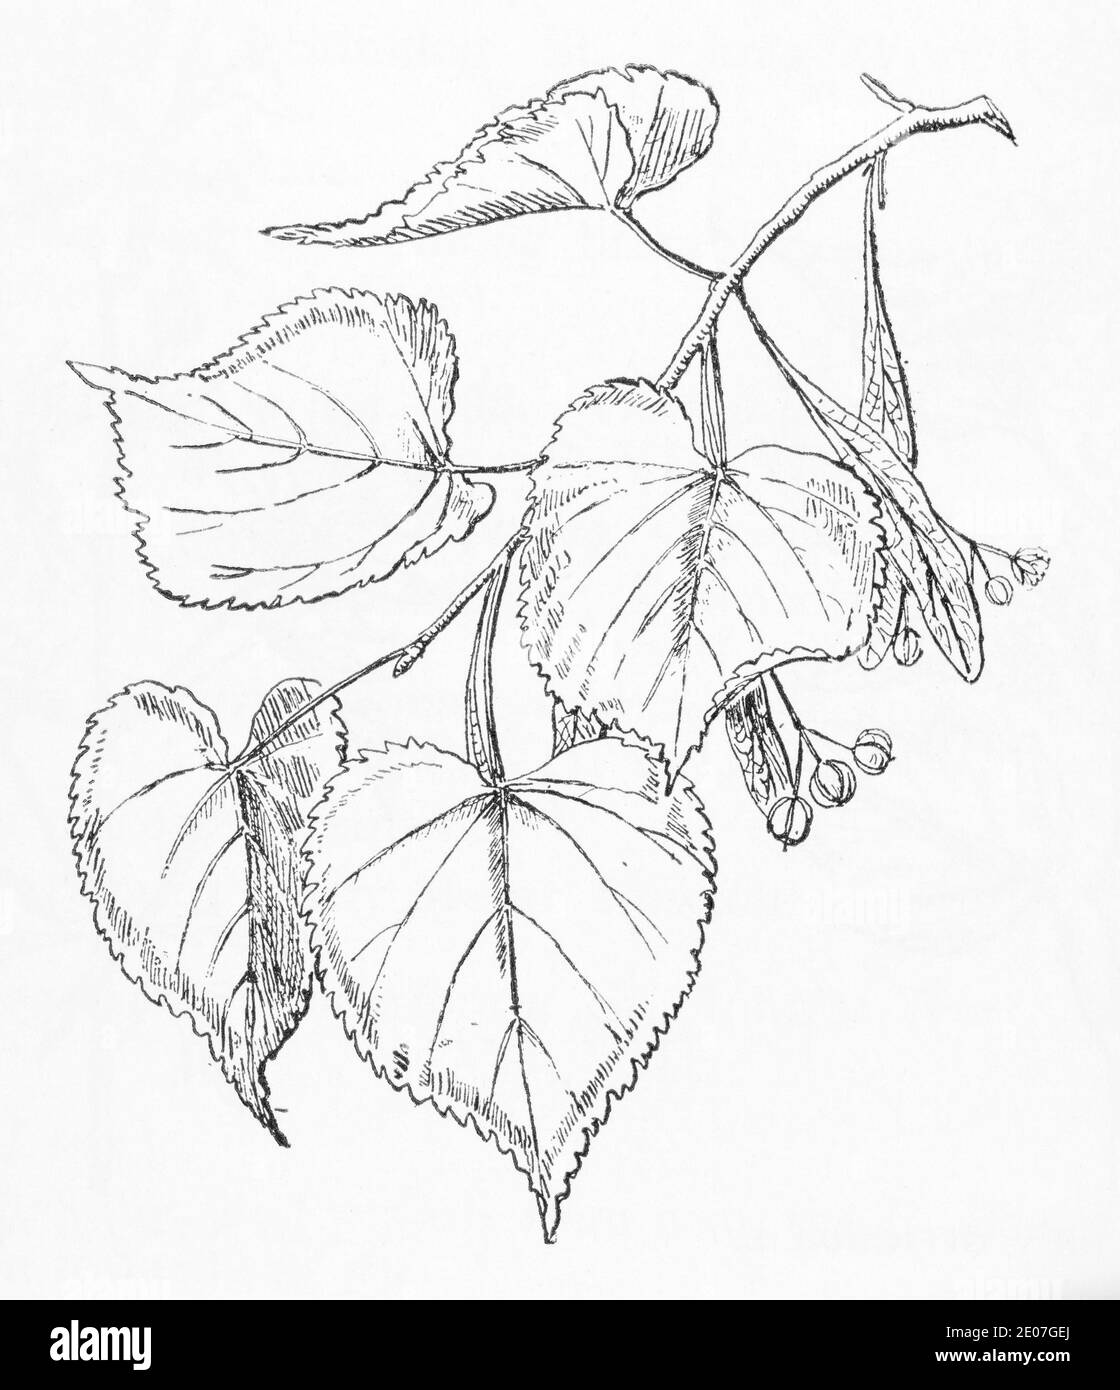 Old botanical illustration engraving of Large-Leaved Lime / Tilia platyphyllos. Traditional medicinal herbal plant. See Notes Stock Photo